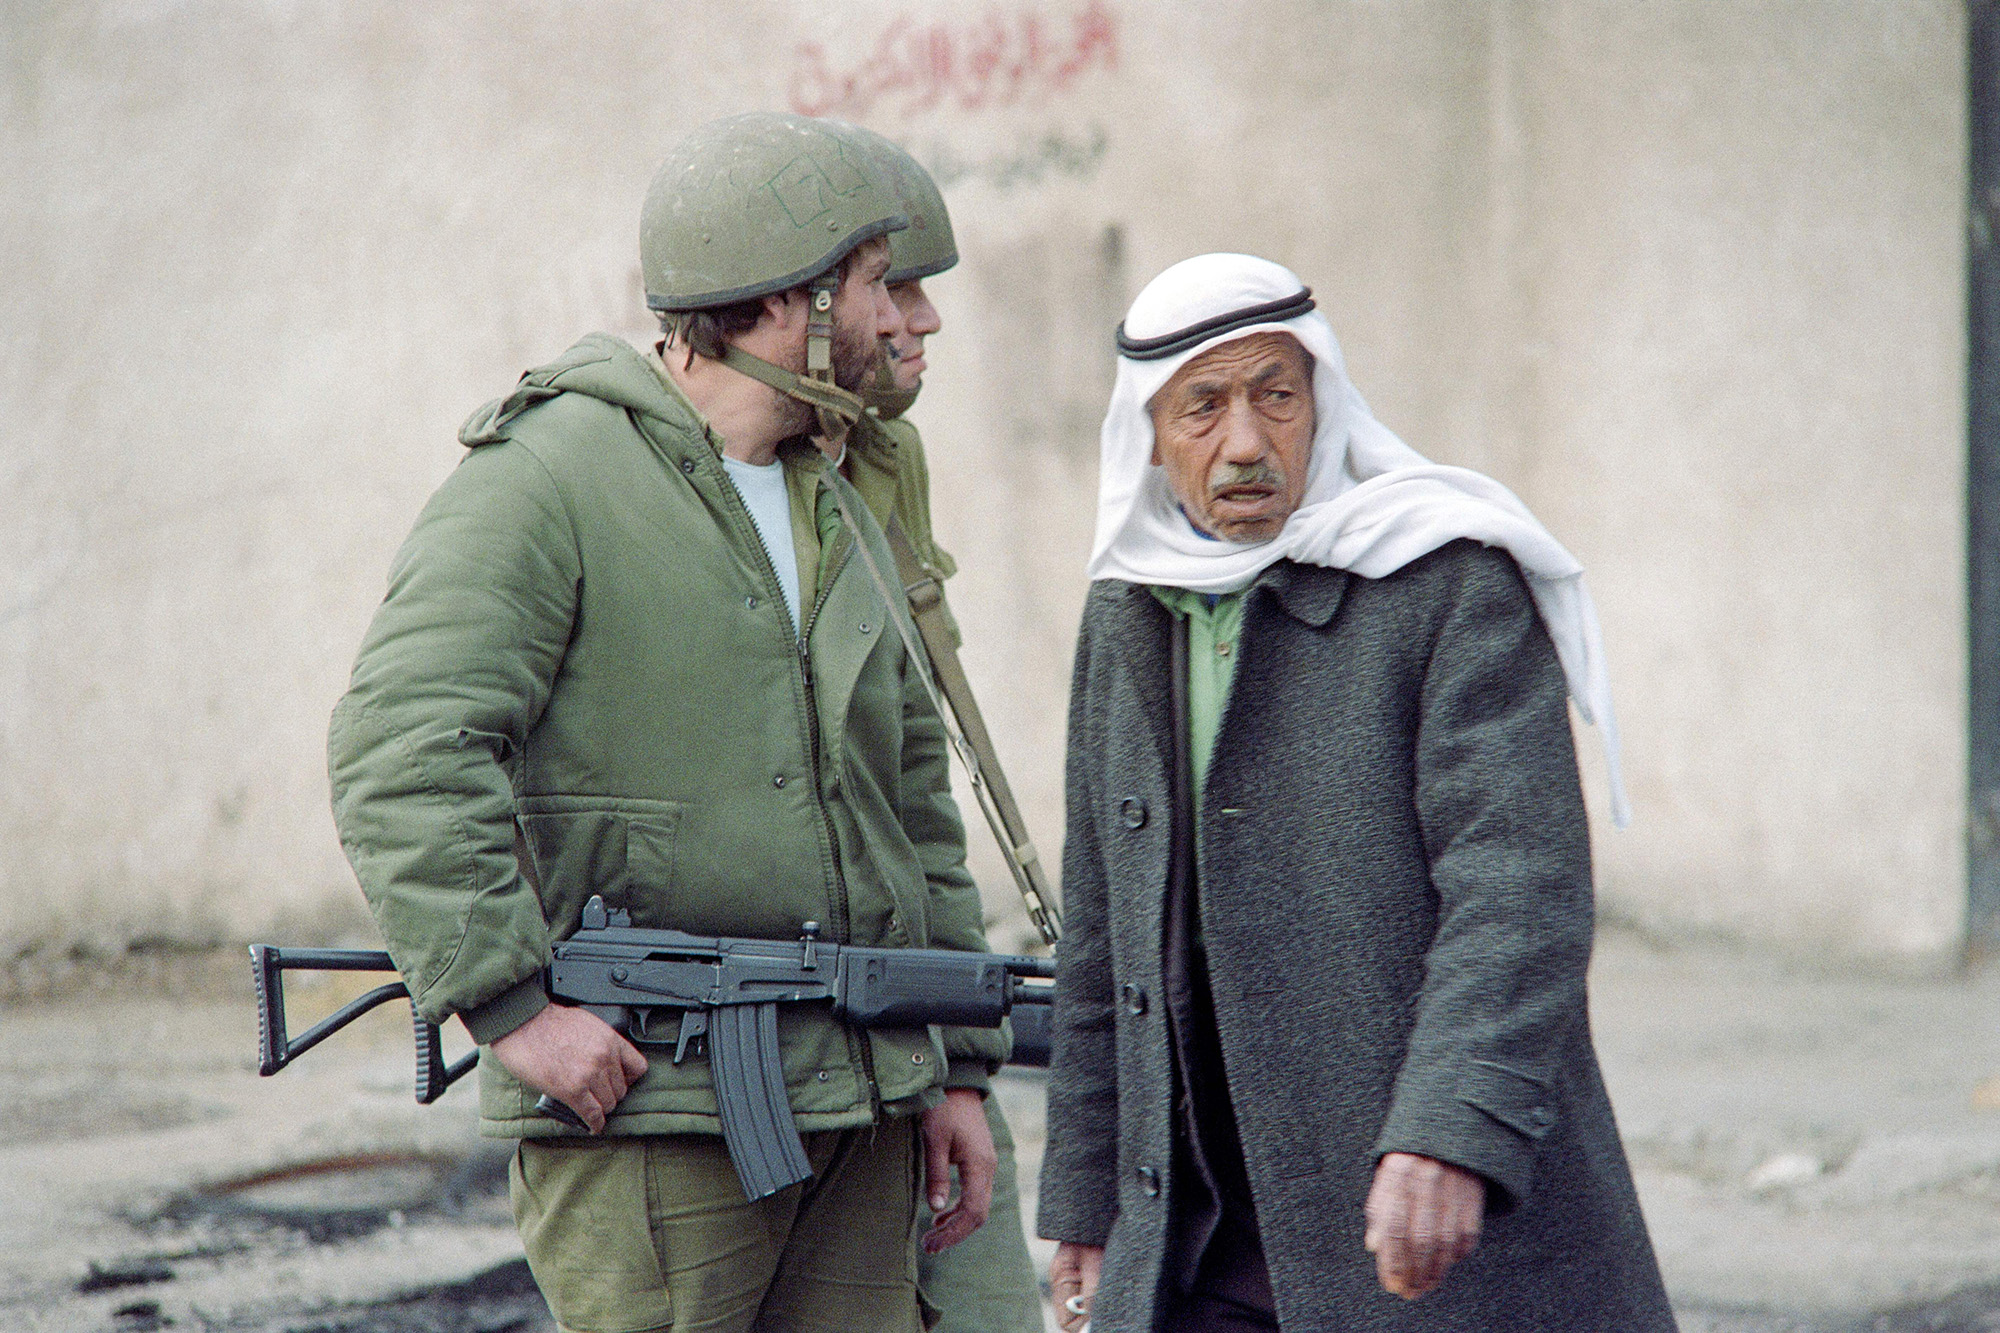 A Palestinian man passes Israeli soldiers patrolling in a street in Gaza on December 20, 1987.